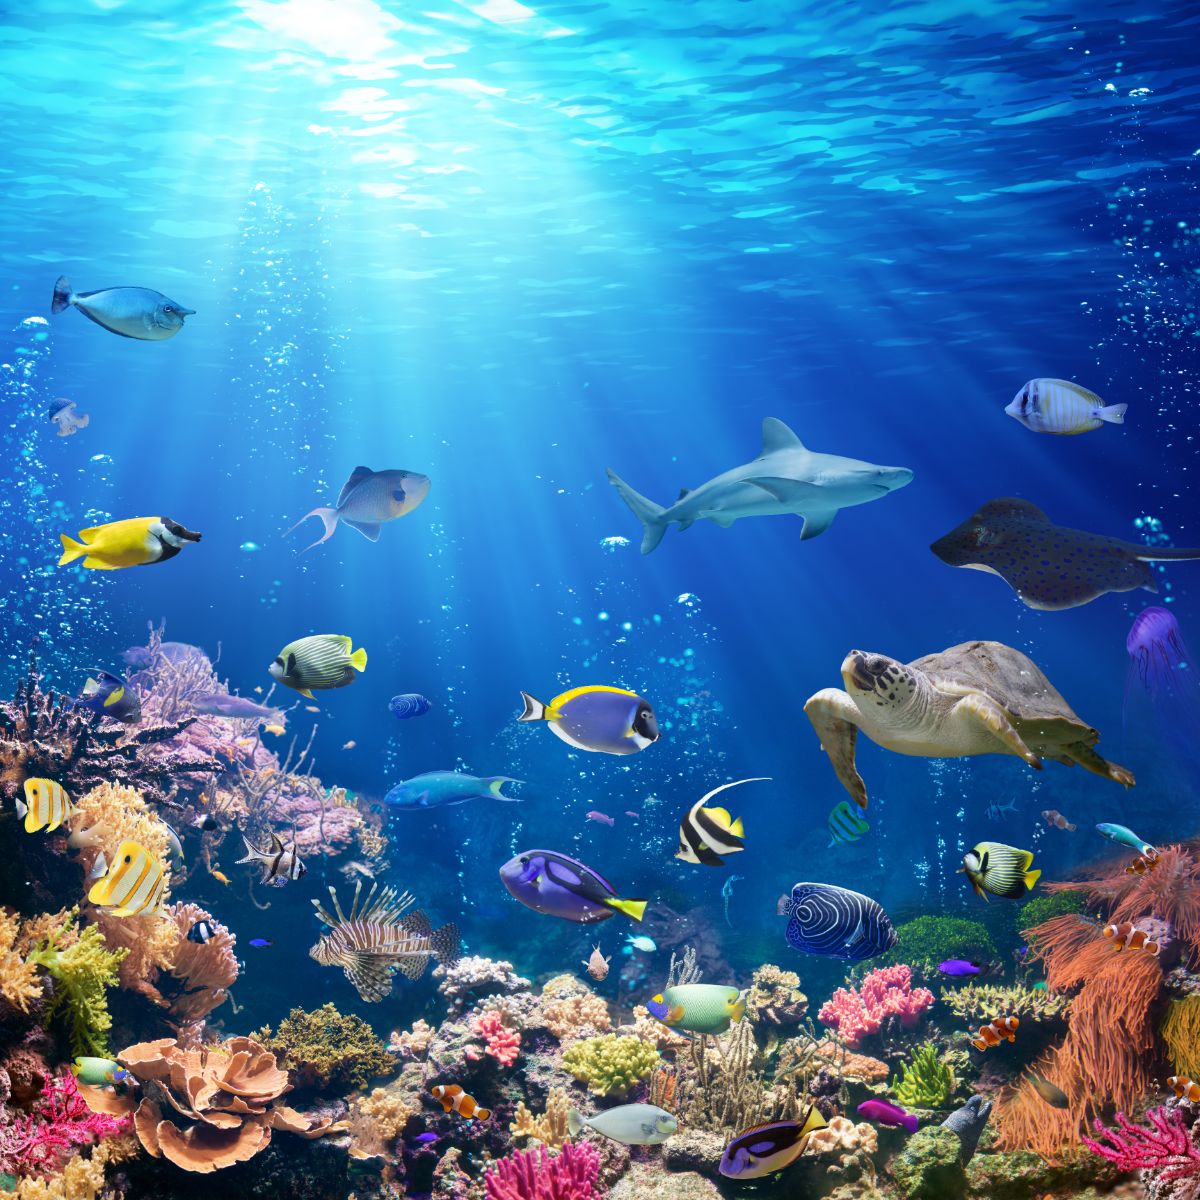 What Is The Spiritual Meaning Of Fish In A Dream